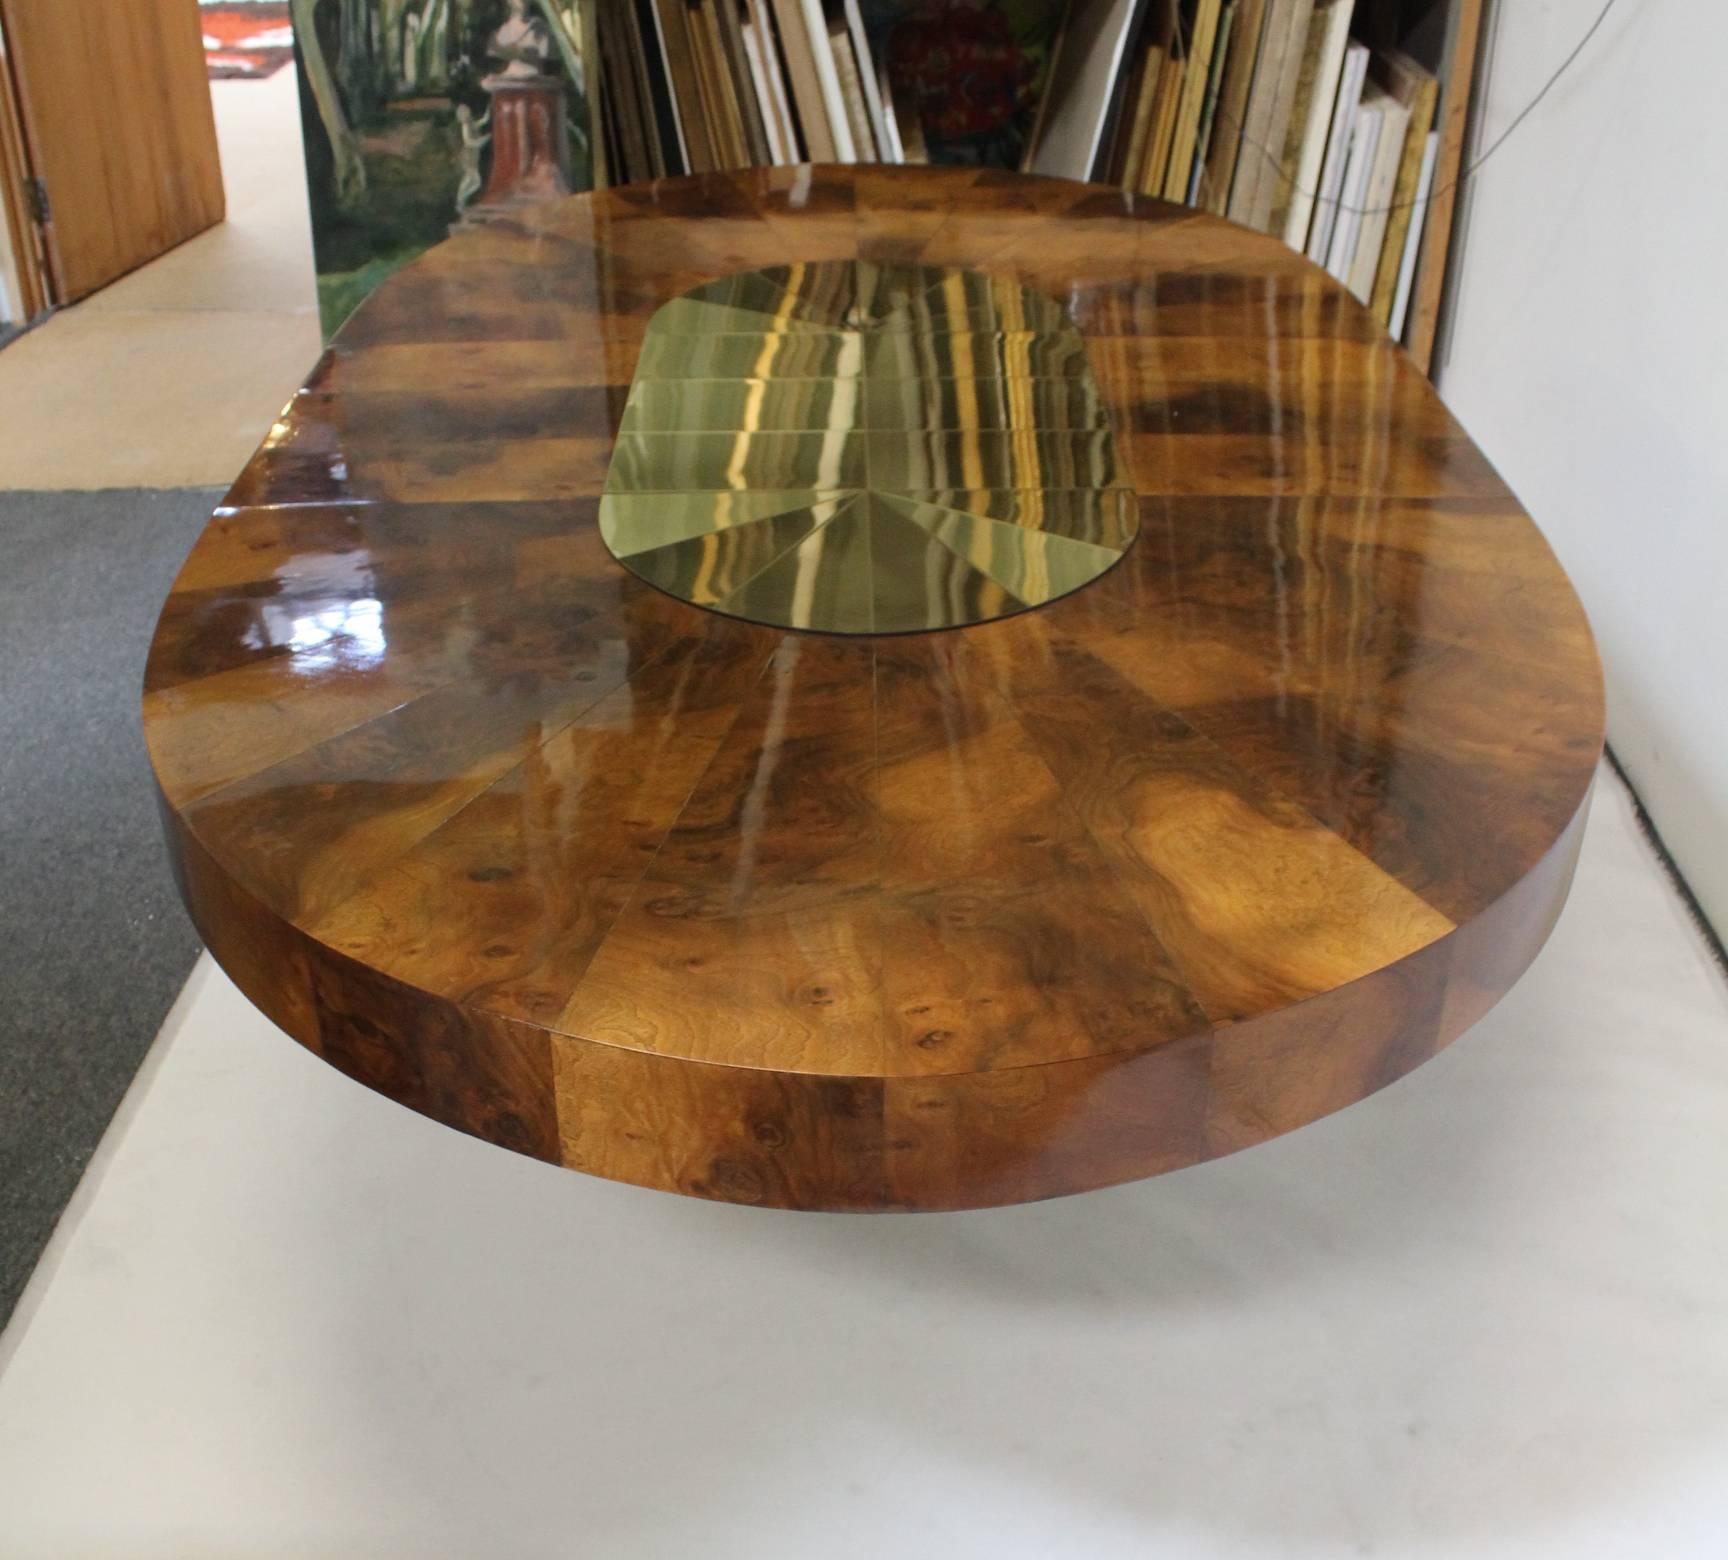 Stunning dining table by Paul Evan with beautiful sunburst brass and wood design. The wood and brass positively glow, circa 1970s.

Table presents very well despite wear consistent with age and use; scratches to middle leaf extender, small dings